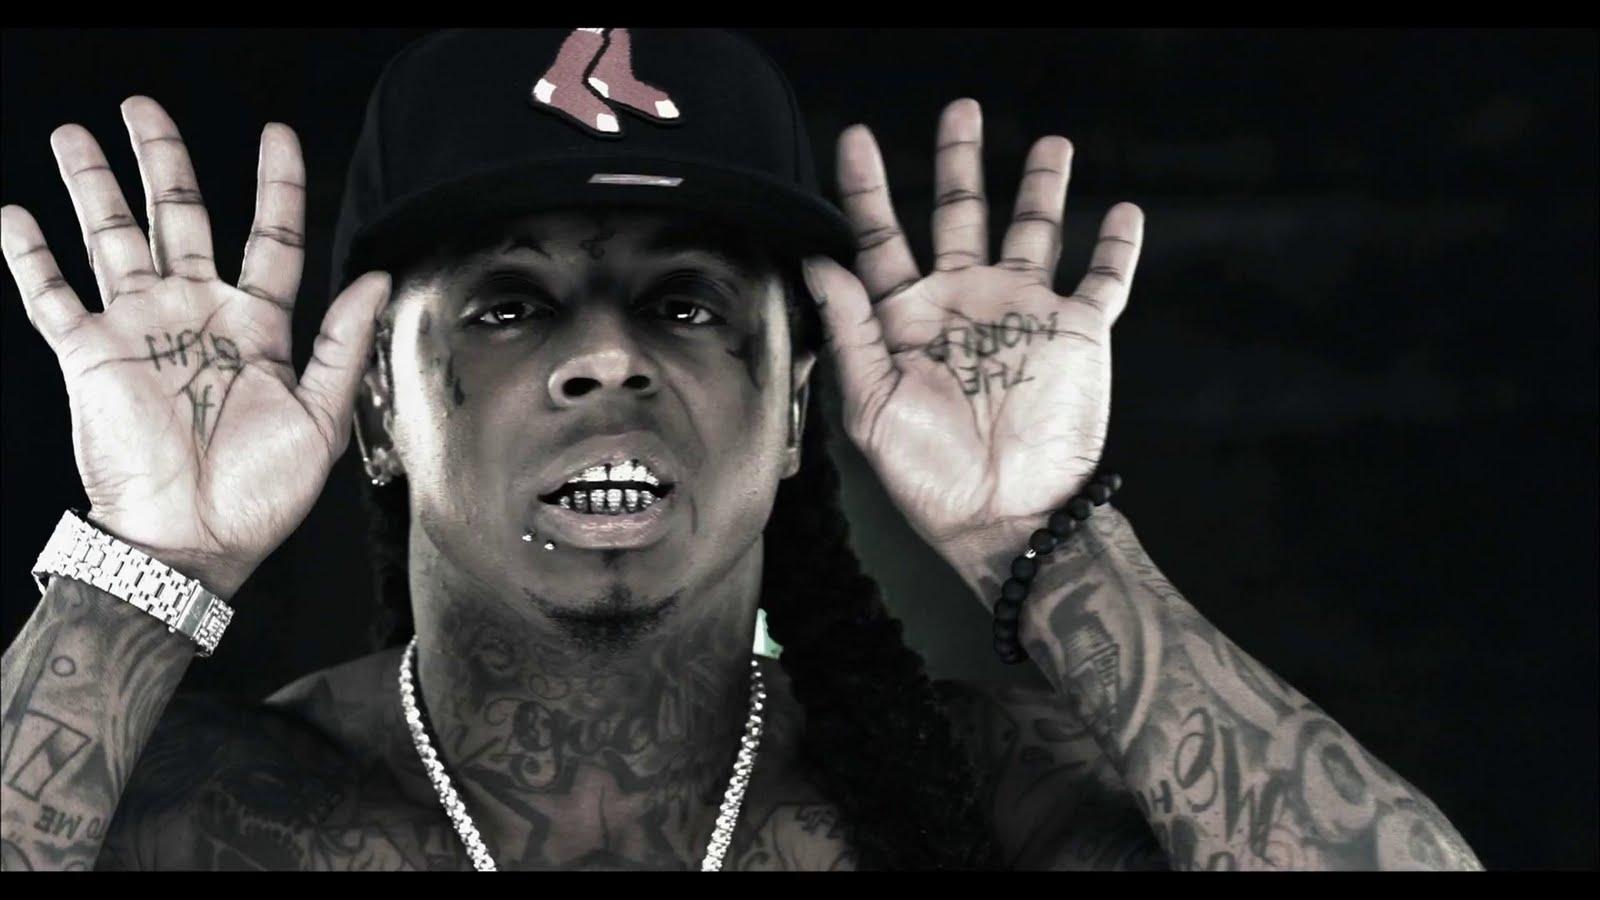 HOT 97.1 SVG 10 Years on Top Lil Wayne Wants 51 Million From